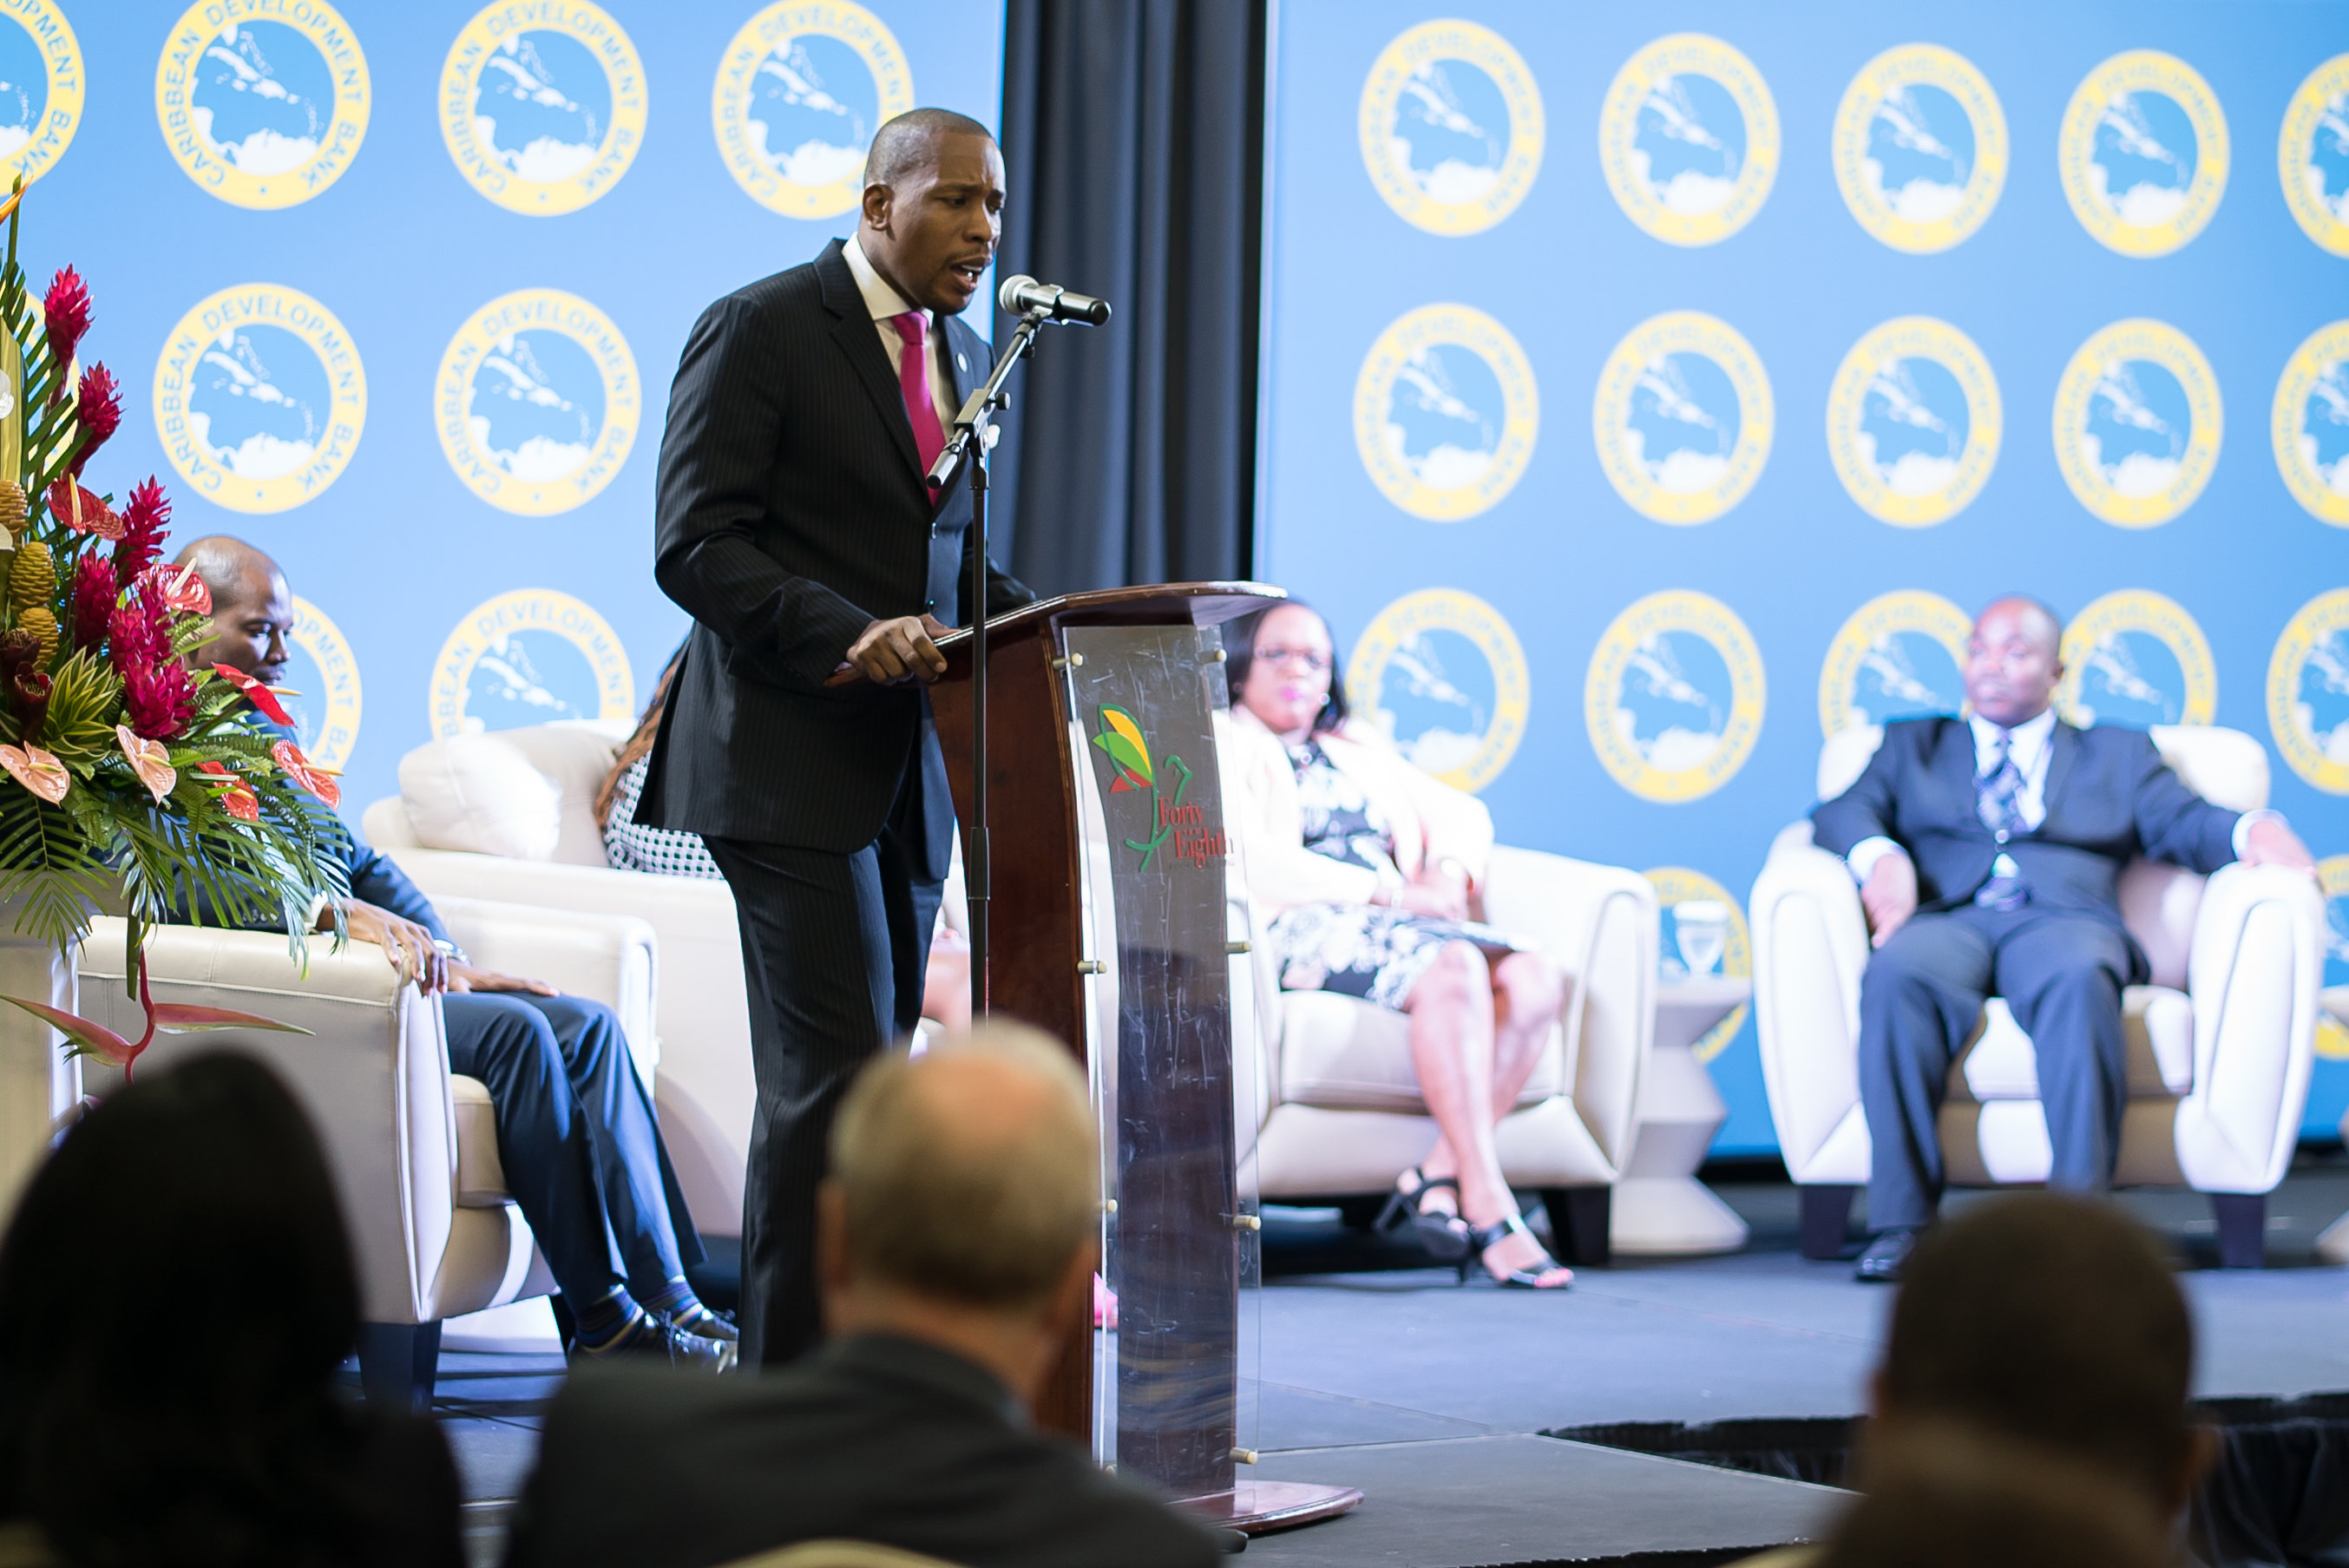 Timothy Antoine, Governor of the Eastern Caribbean Central Bank (ECCB) delivers his keynote presentation during the seminar on Building Resilient Cities, hosted by the Caribbean Development Bank (CDB) in Grenada on May 30.